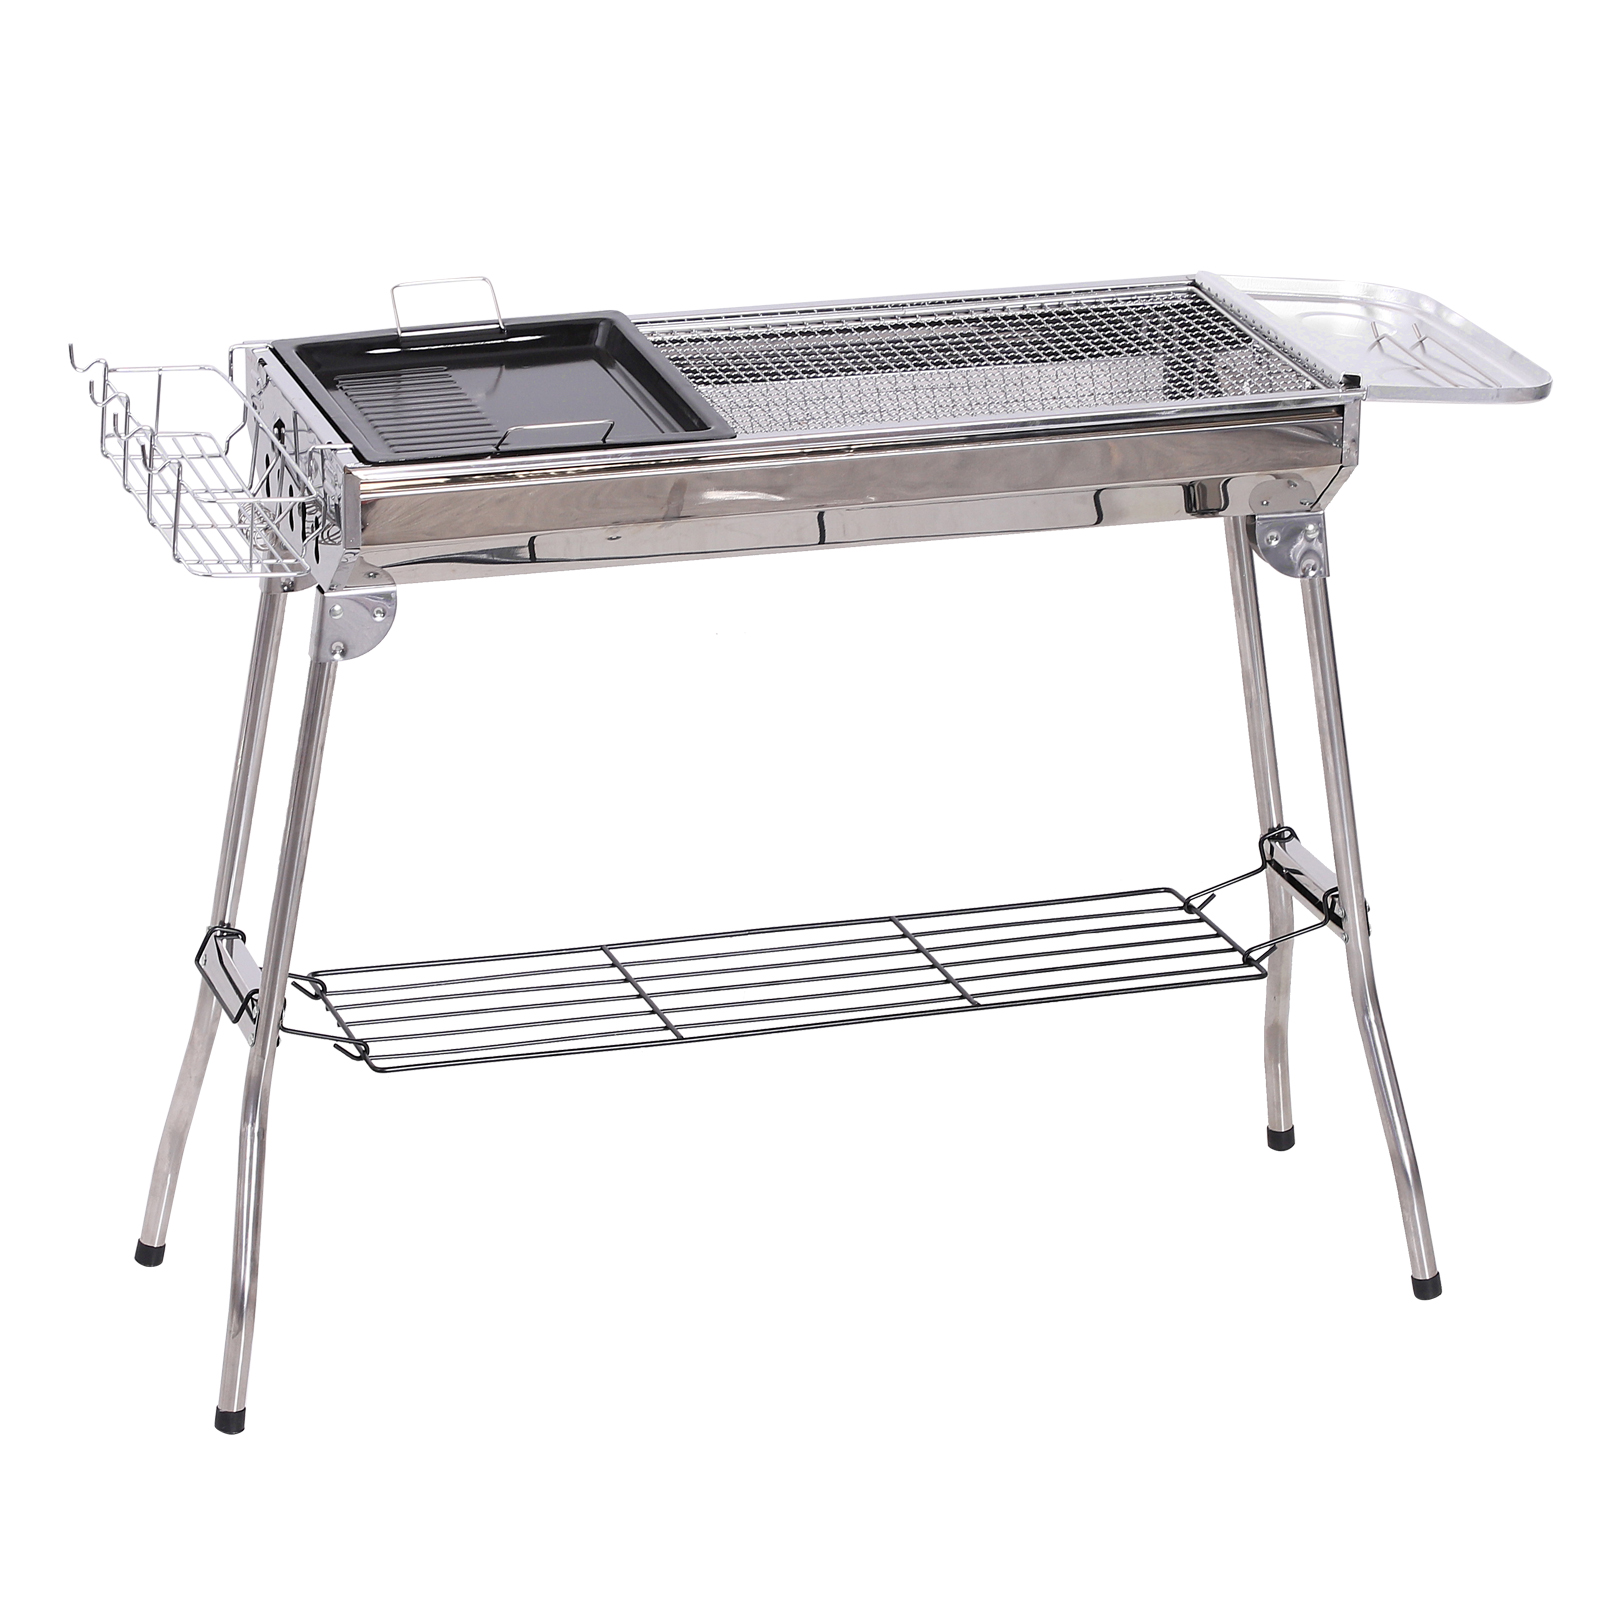 Outsunny Charcoal Bbq Stainless Steel Portable Foldable Barbecue Charcoal Grill Outdoor Cooker For Camp Party Picnic